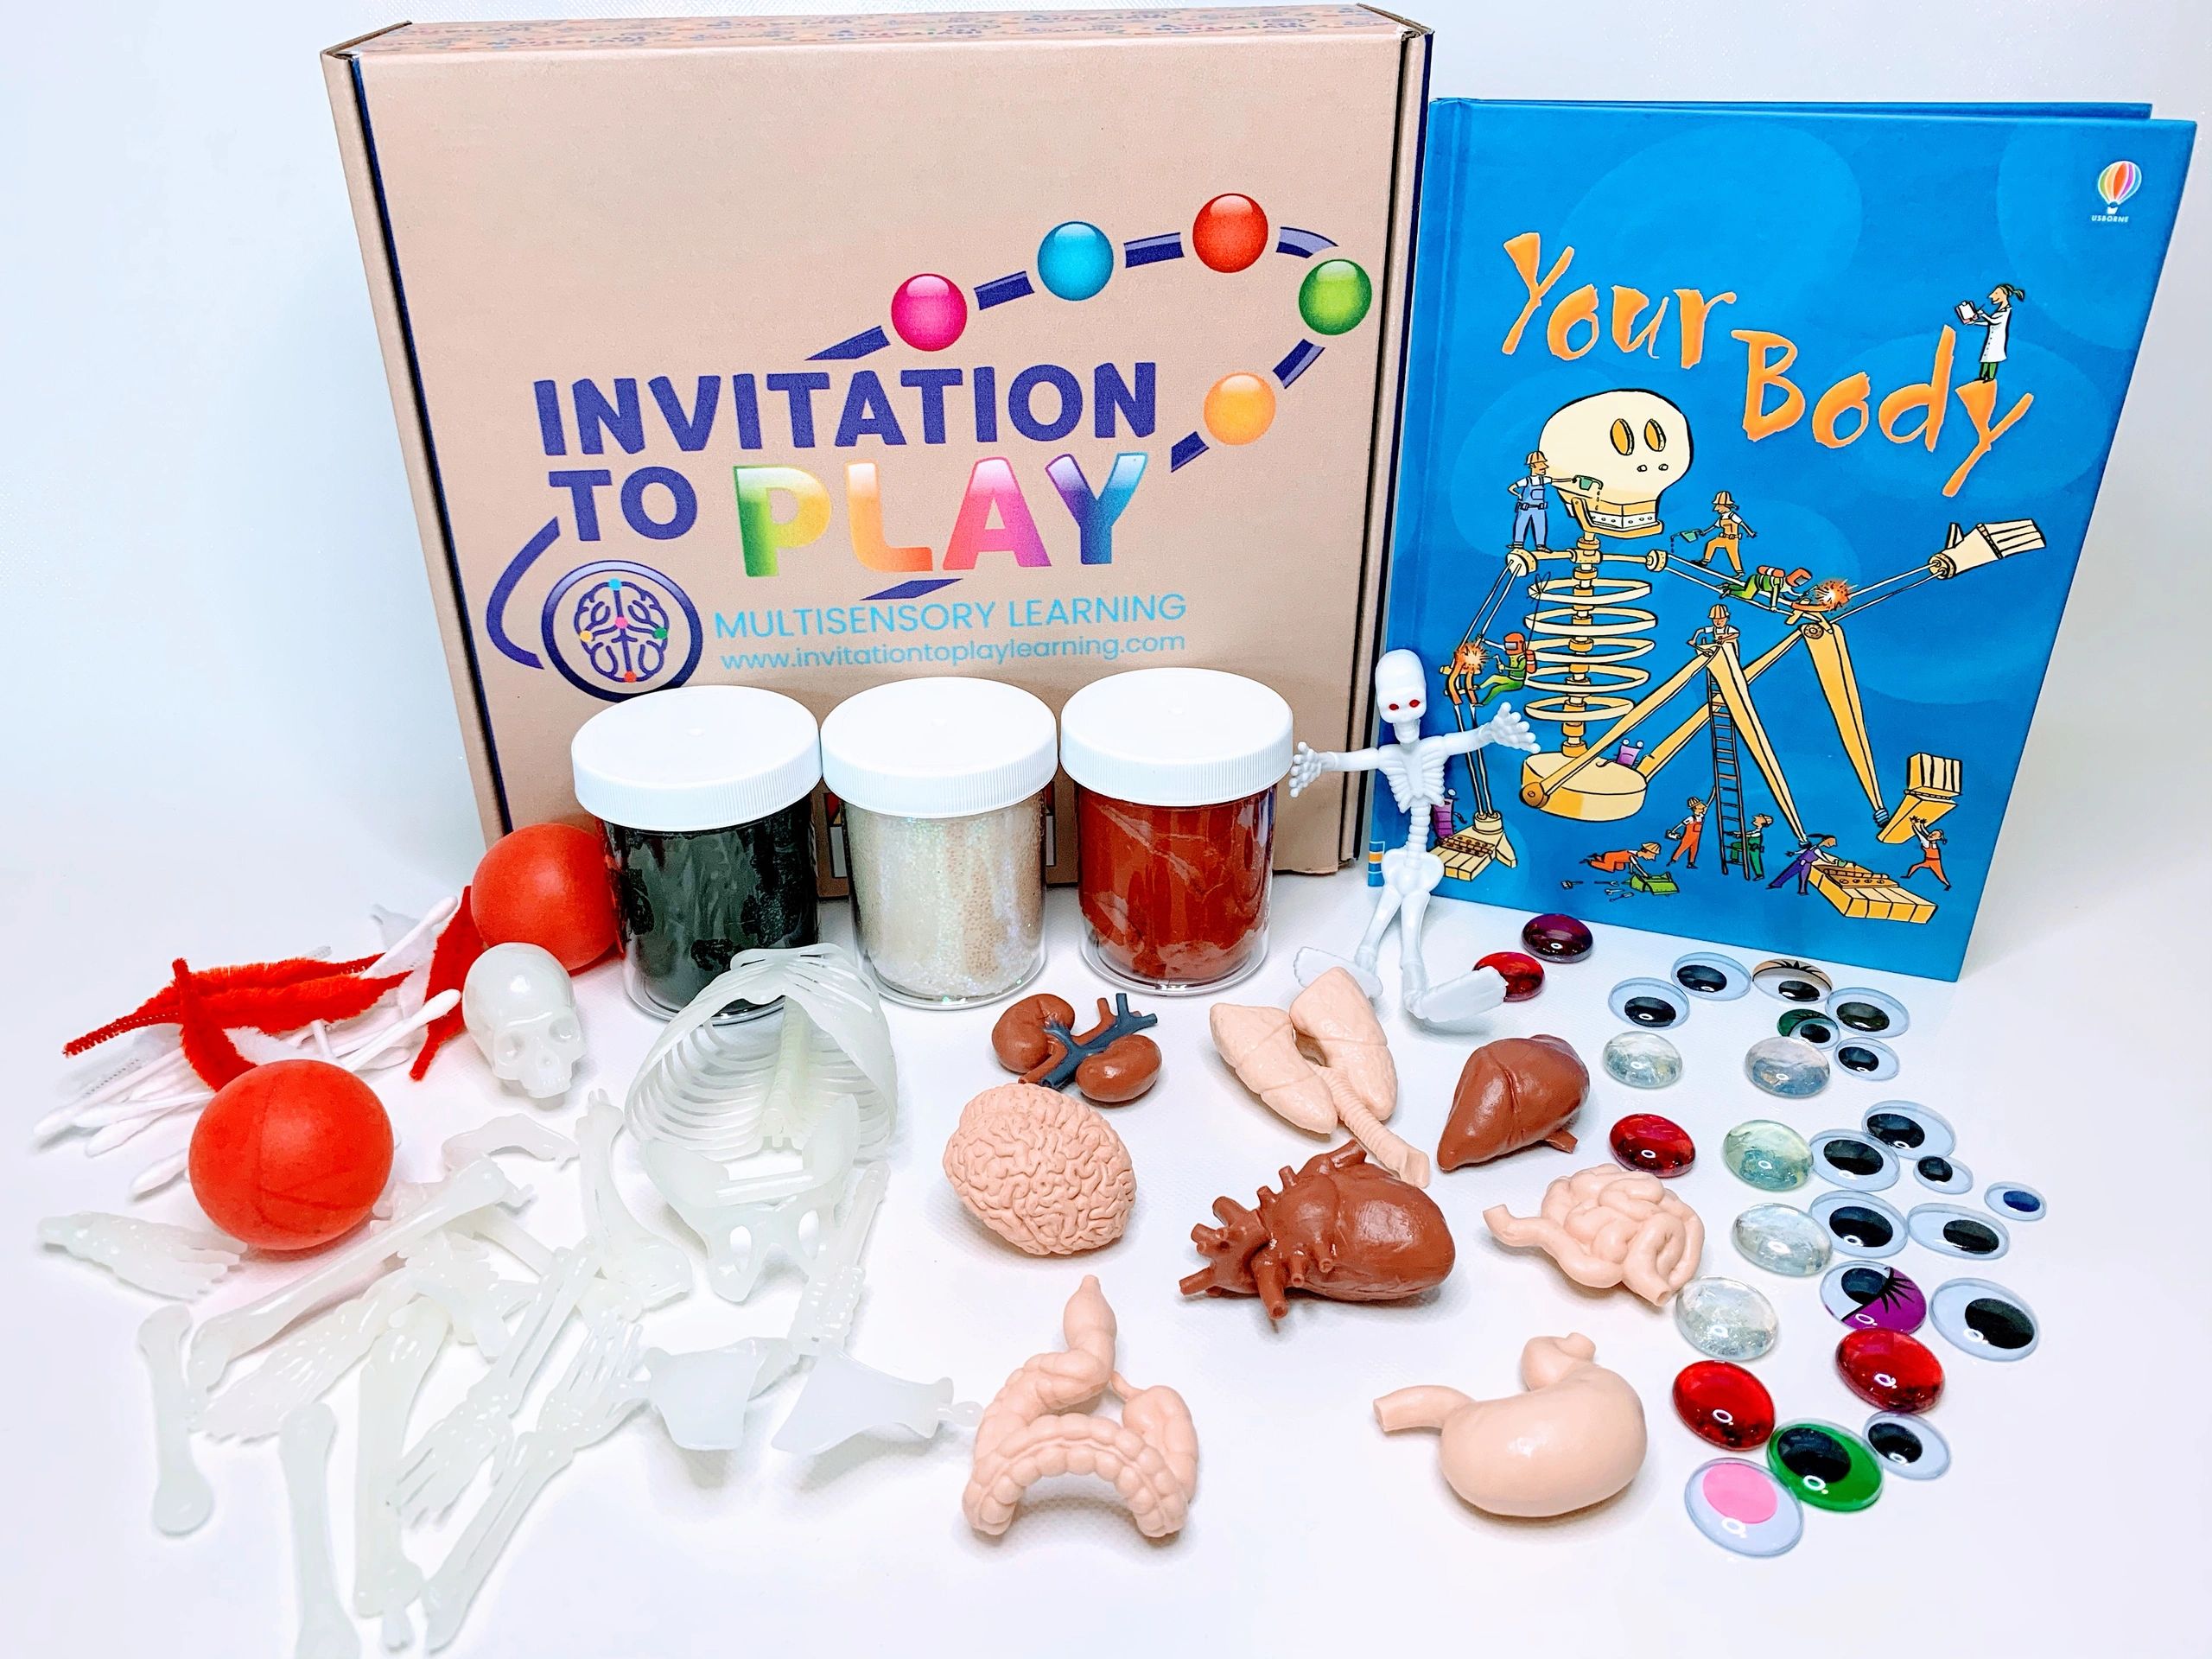 Learn with Play at Home: Invitation to Play and Learn with